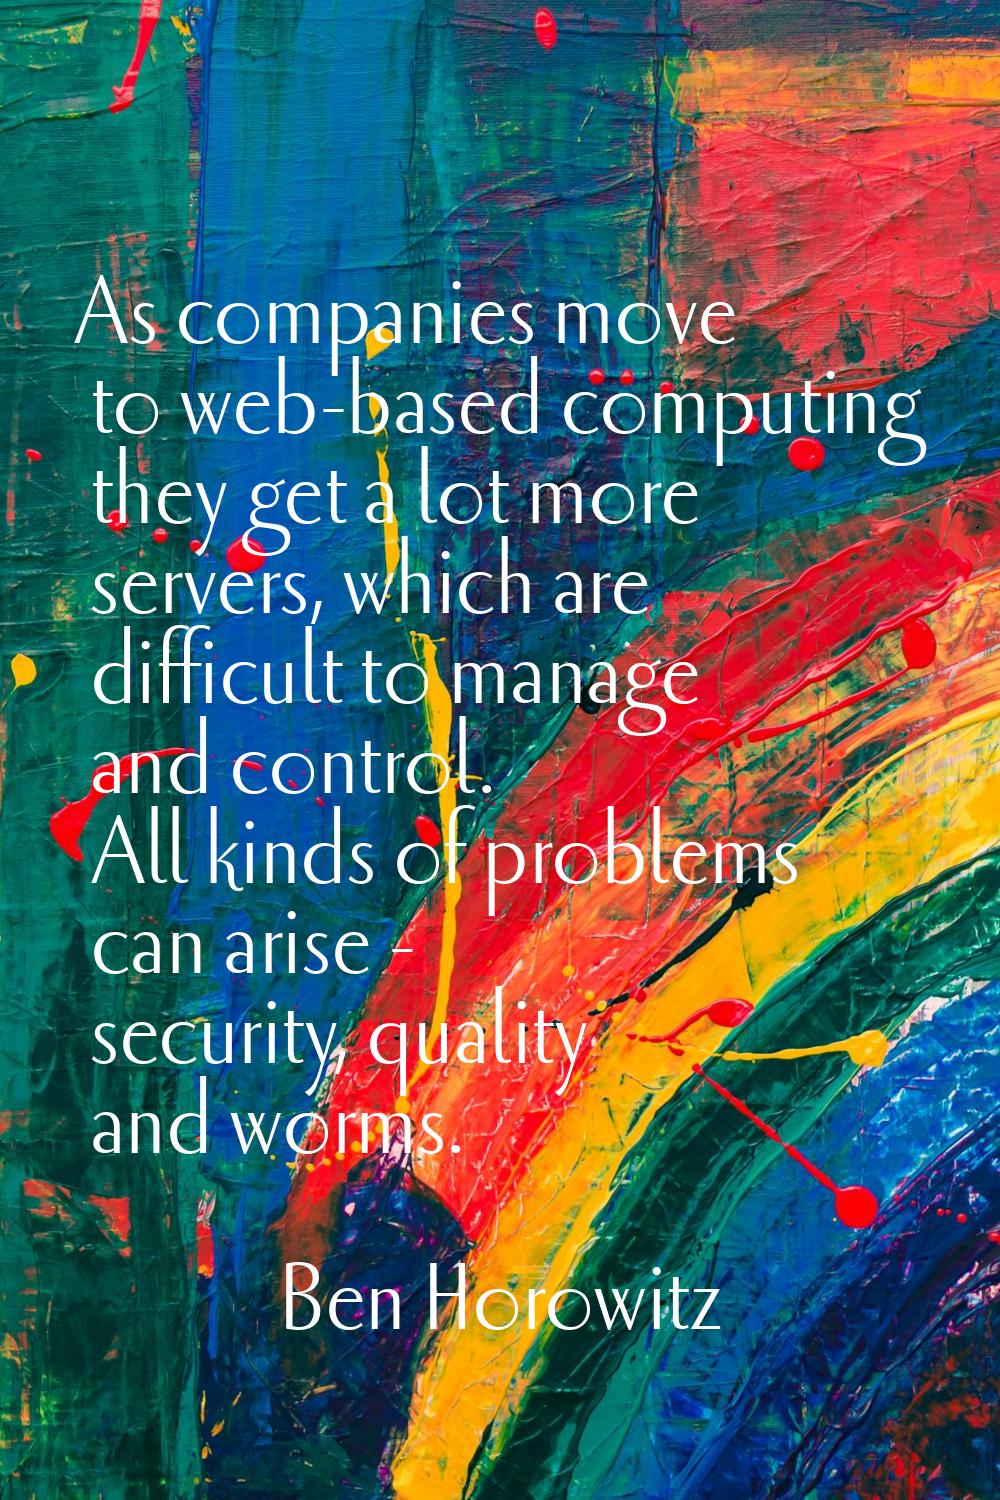 As companies move to web-based computing they get a lot more servers, which are difficult to manage